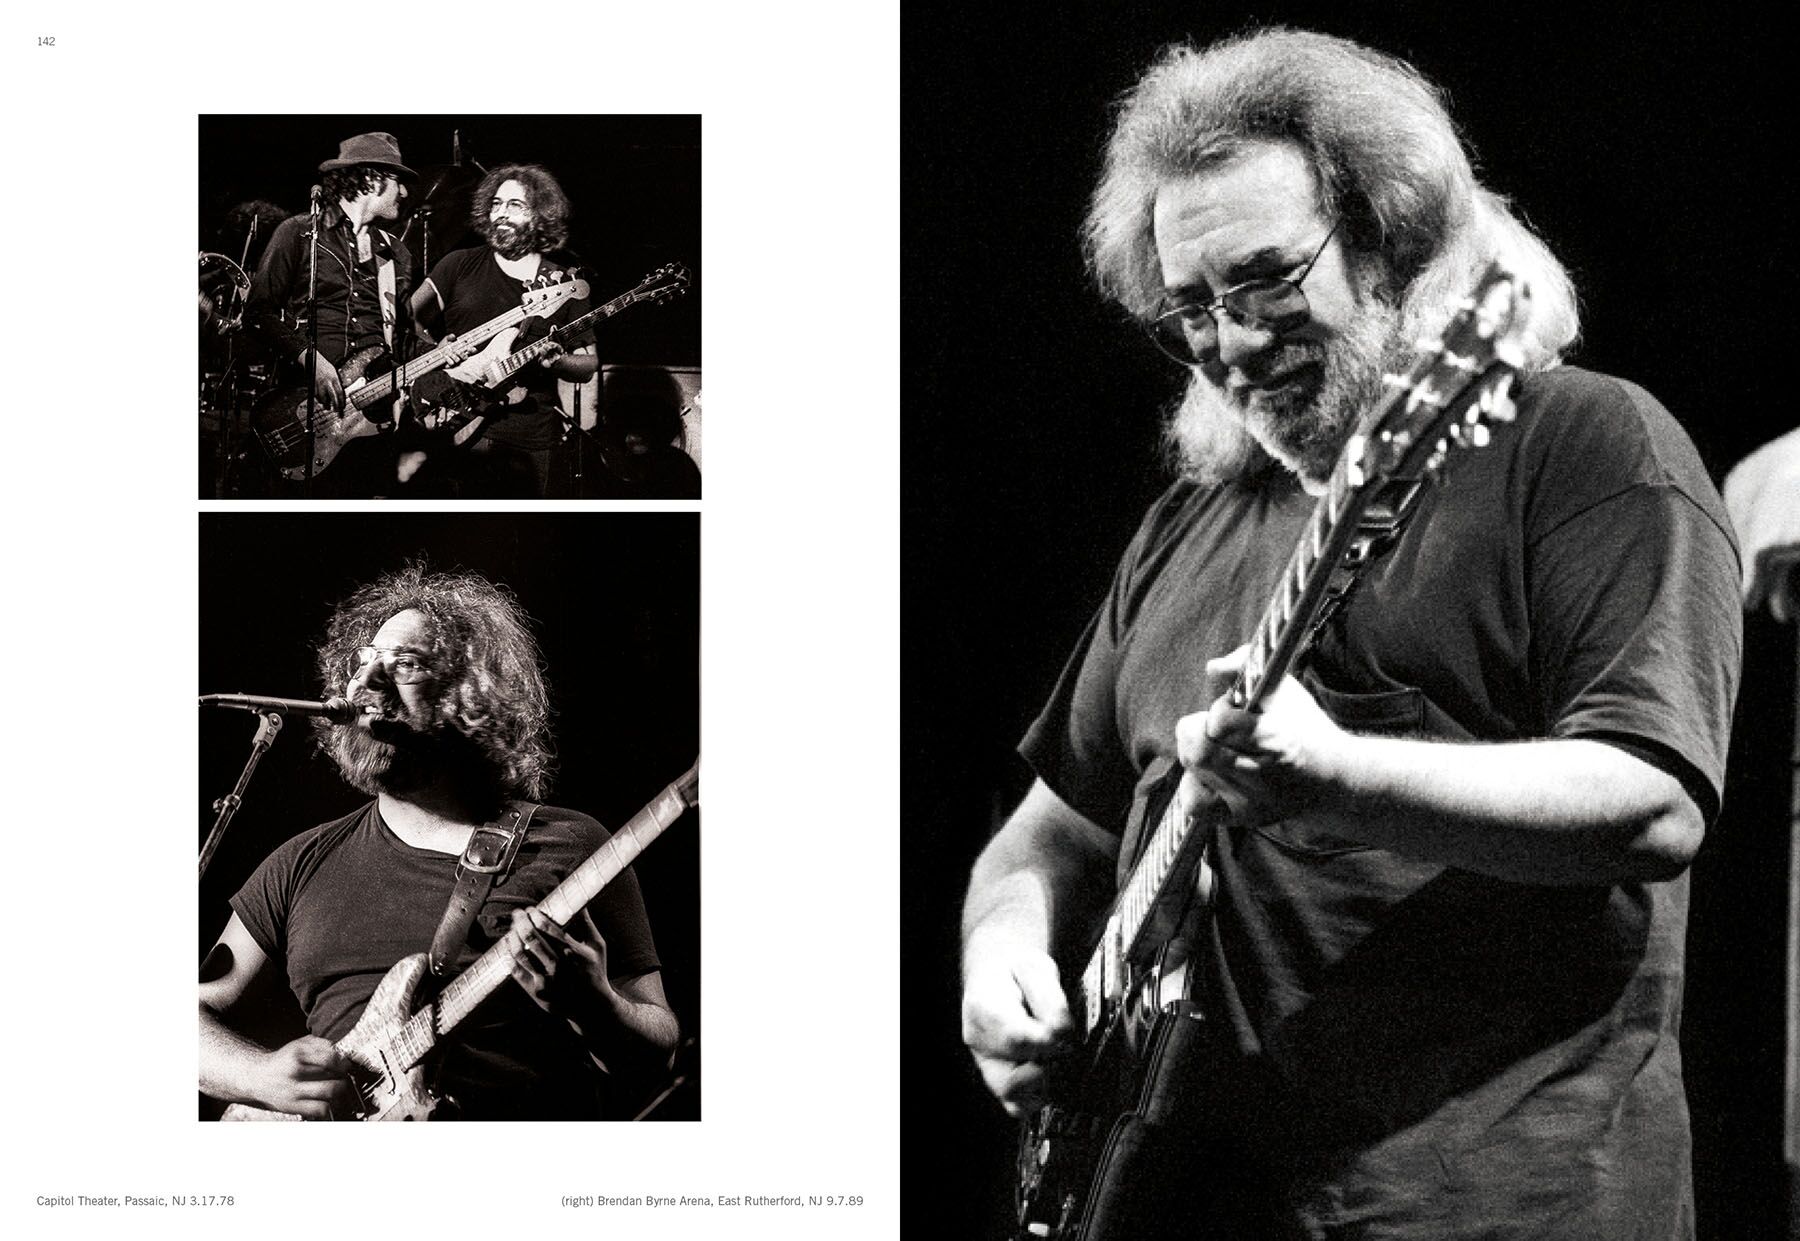 JGB in Jersey - 3/17/78 & 9/7/89 | "Just Jerry"